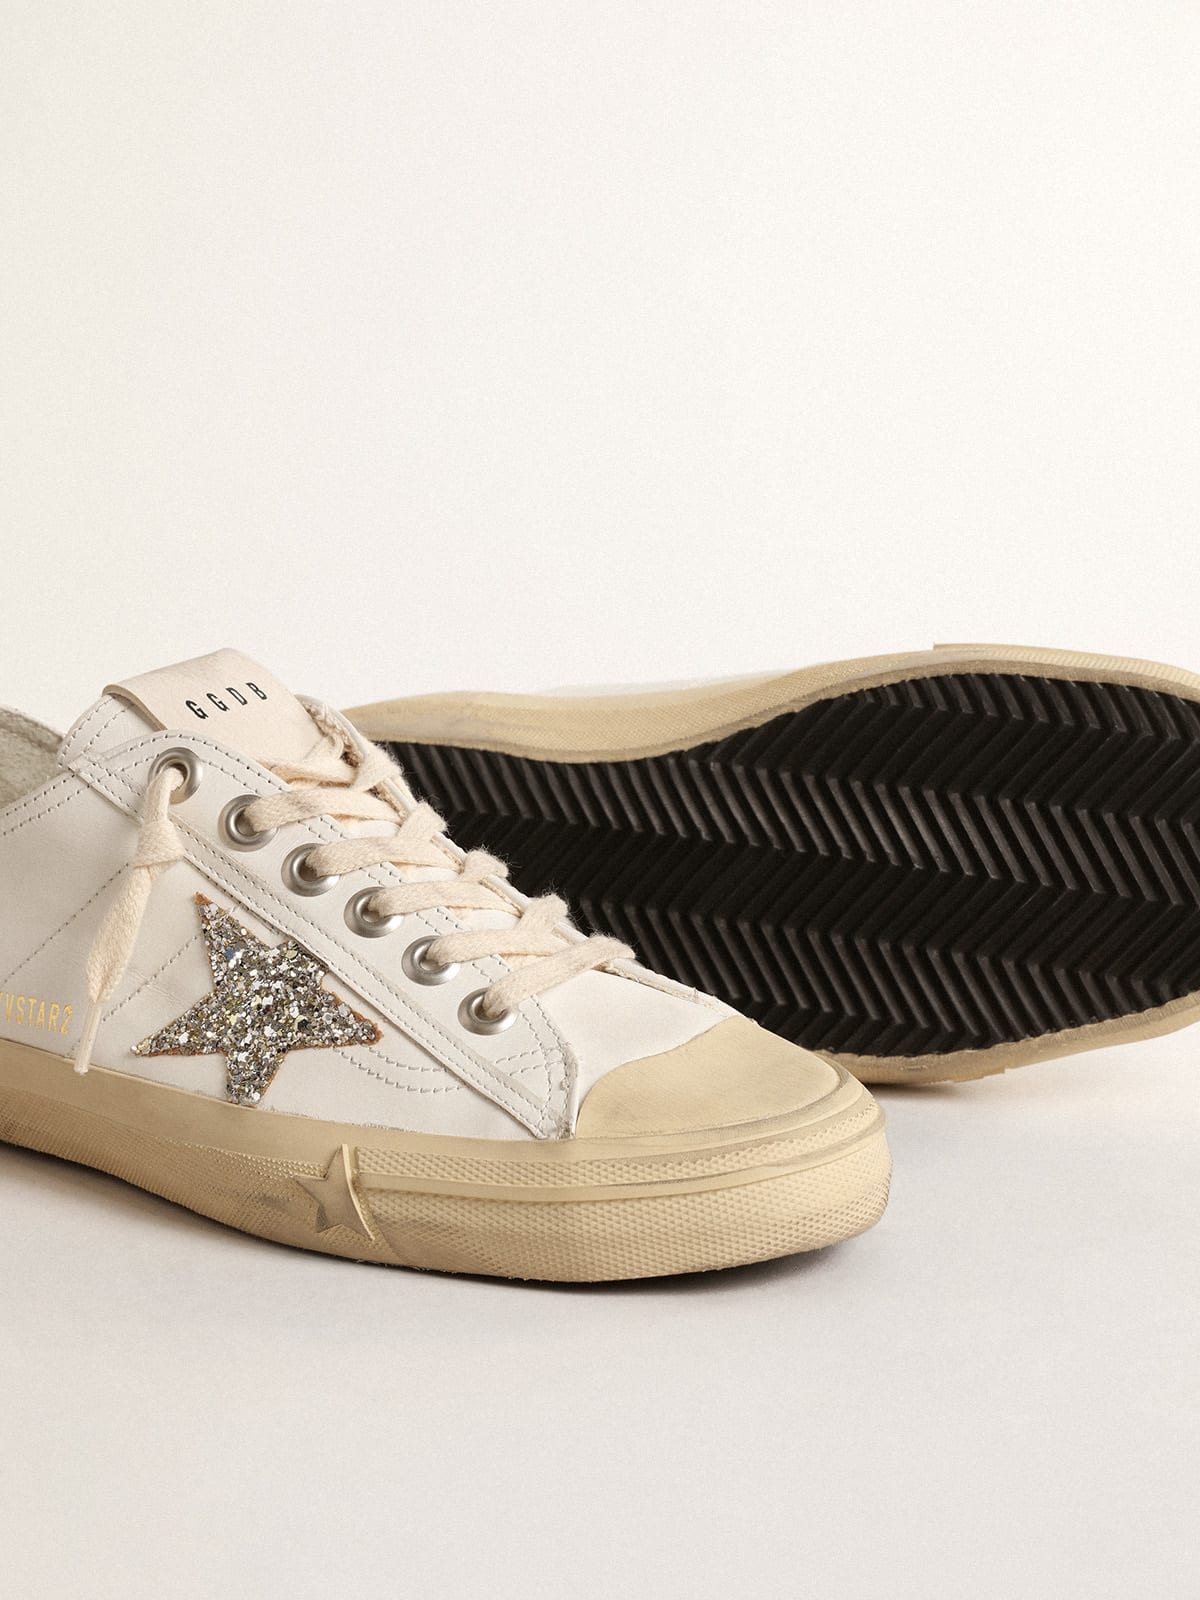 Golden Goose - V-Star in white leather with a platinum glitter star in 